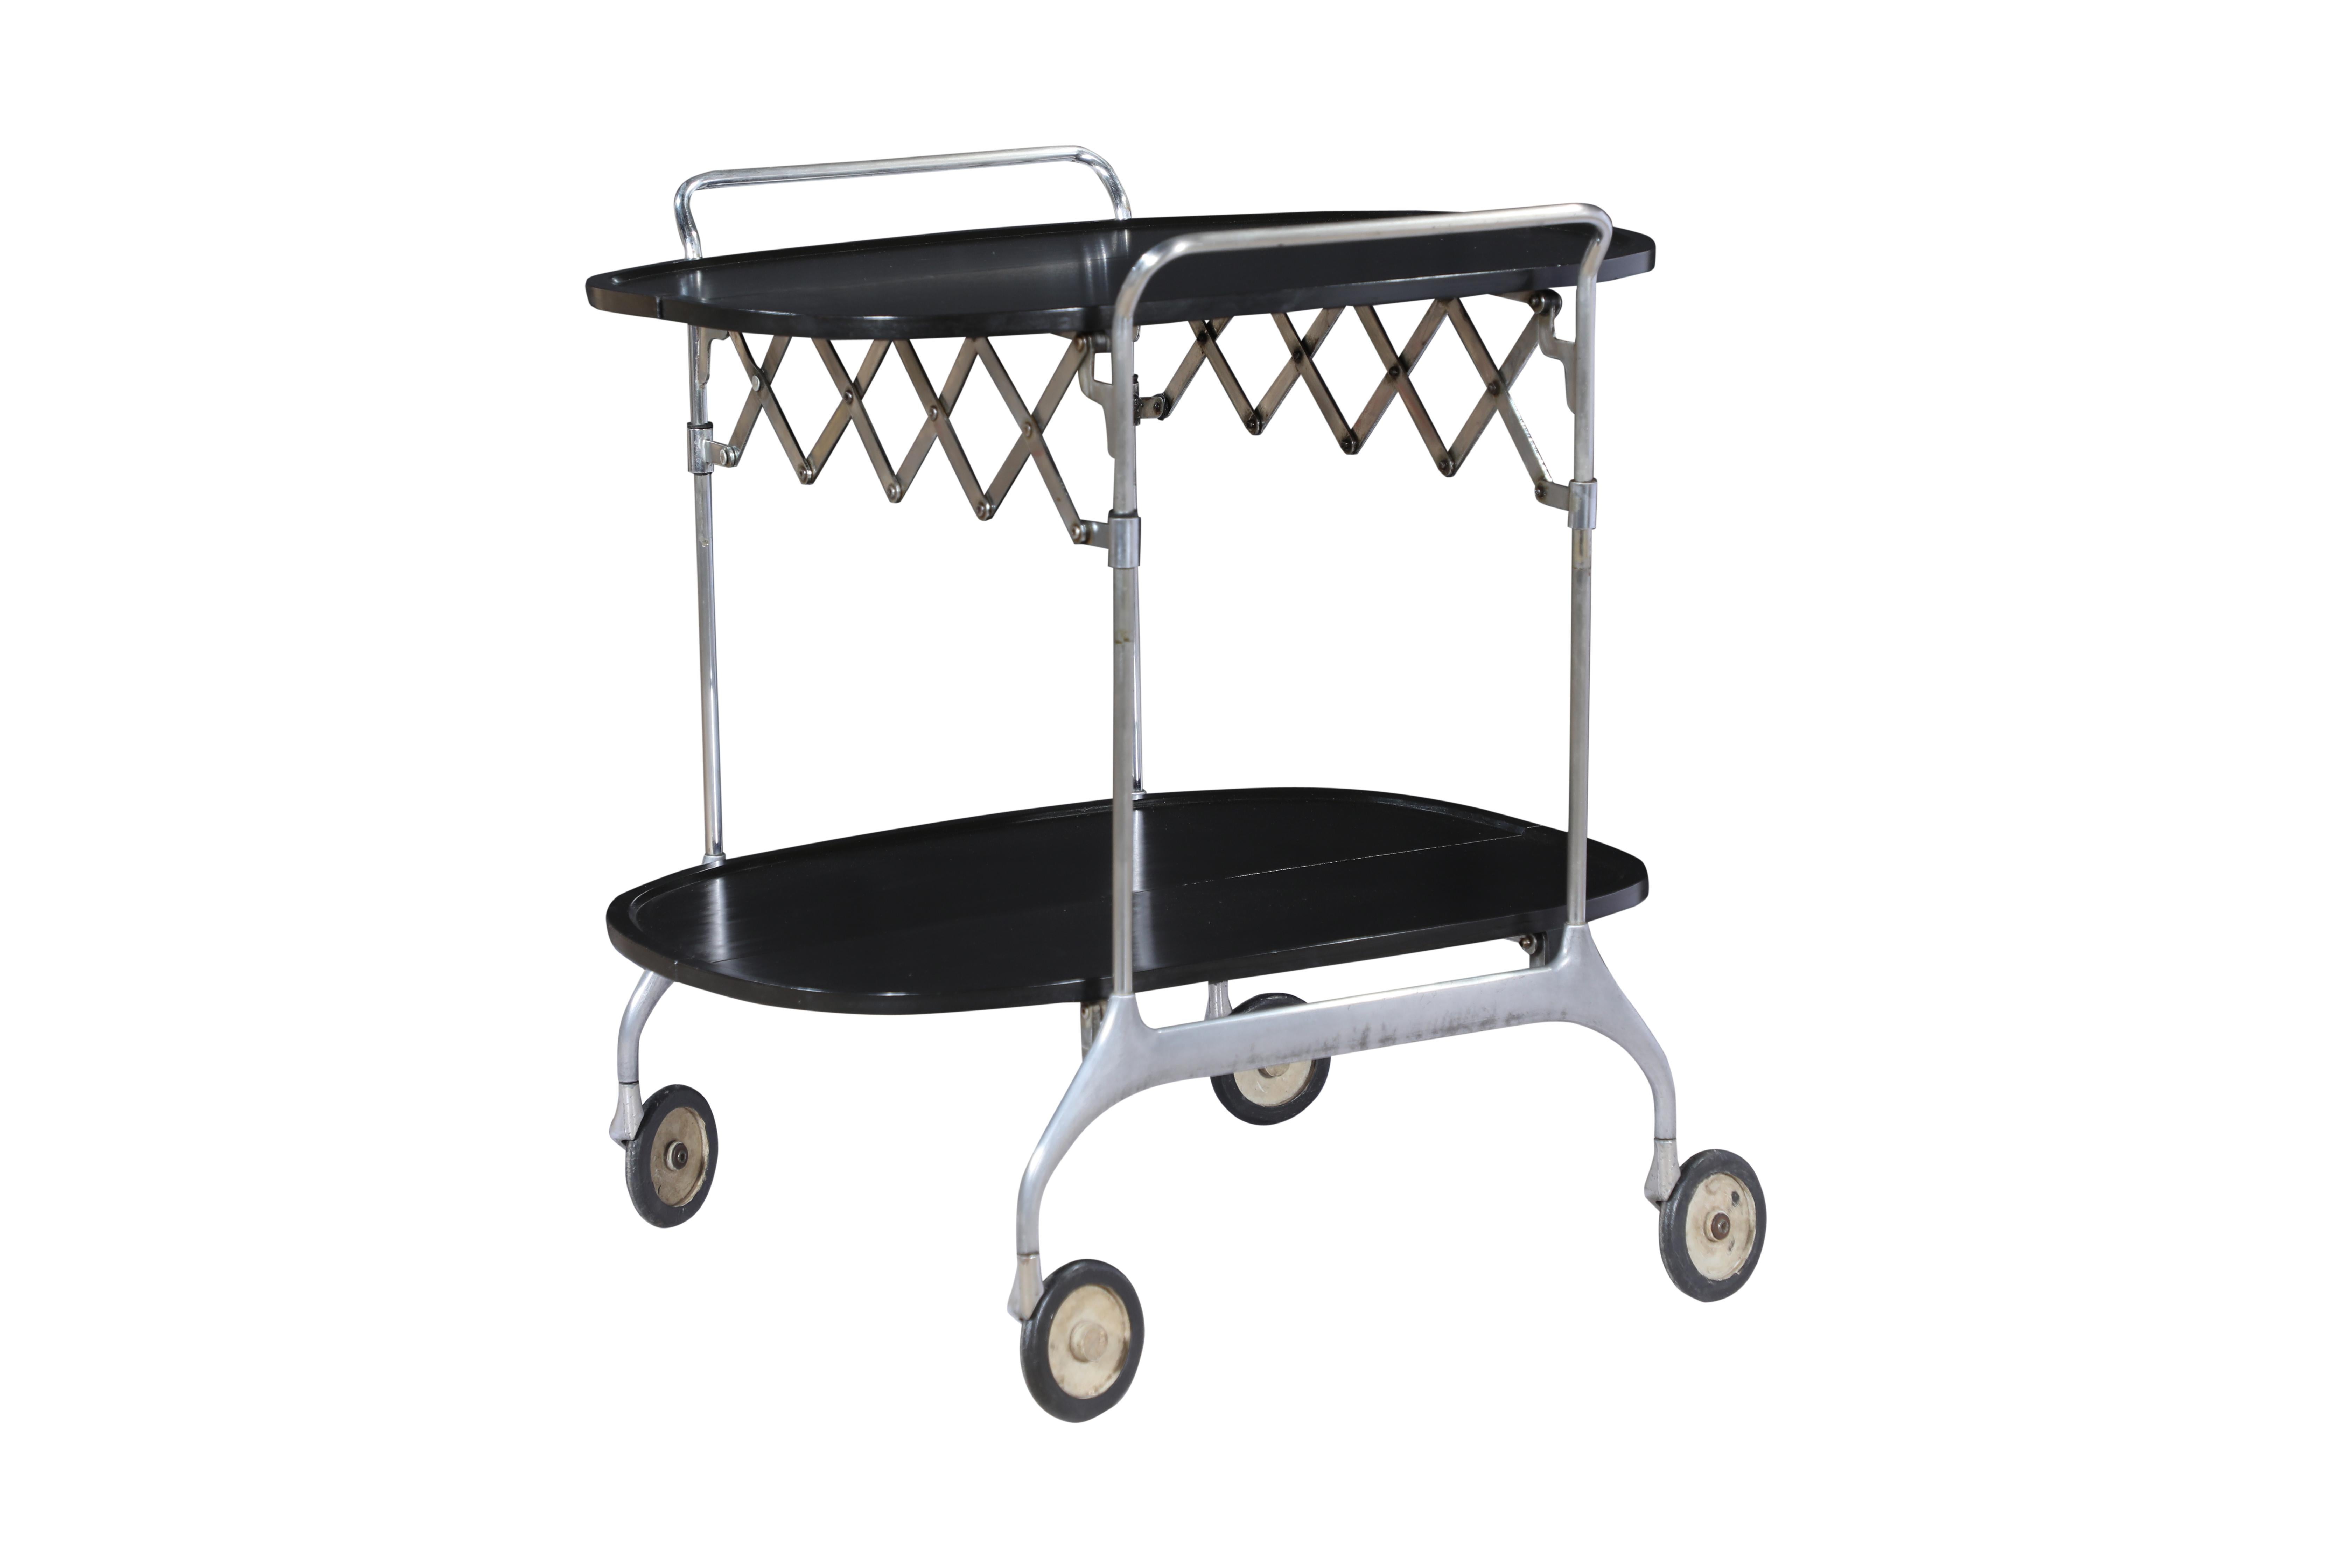 This is a rare and unusual Mid-Century Modern piece. A folding bakelite and chrome bar cart from the 1960's. The chrome accordion structure allows you to fold the bar cart up and store it away. Two handles on the sides and swivel feet for